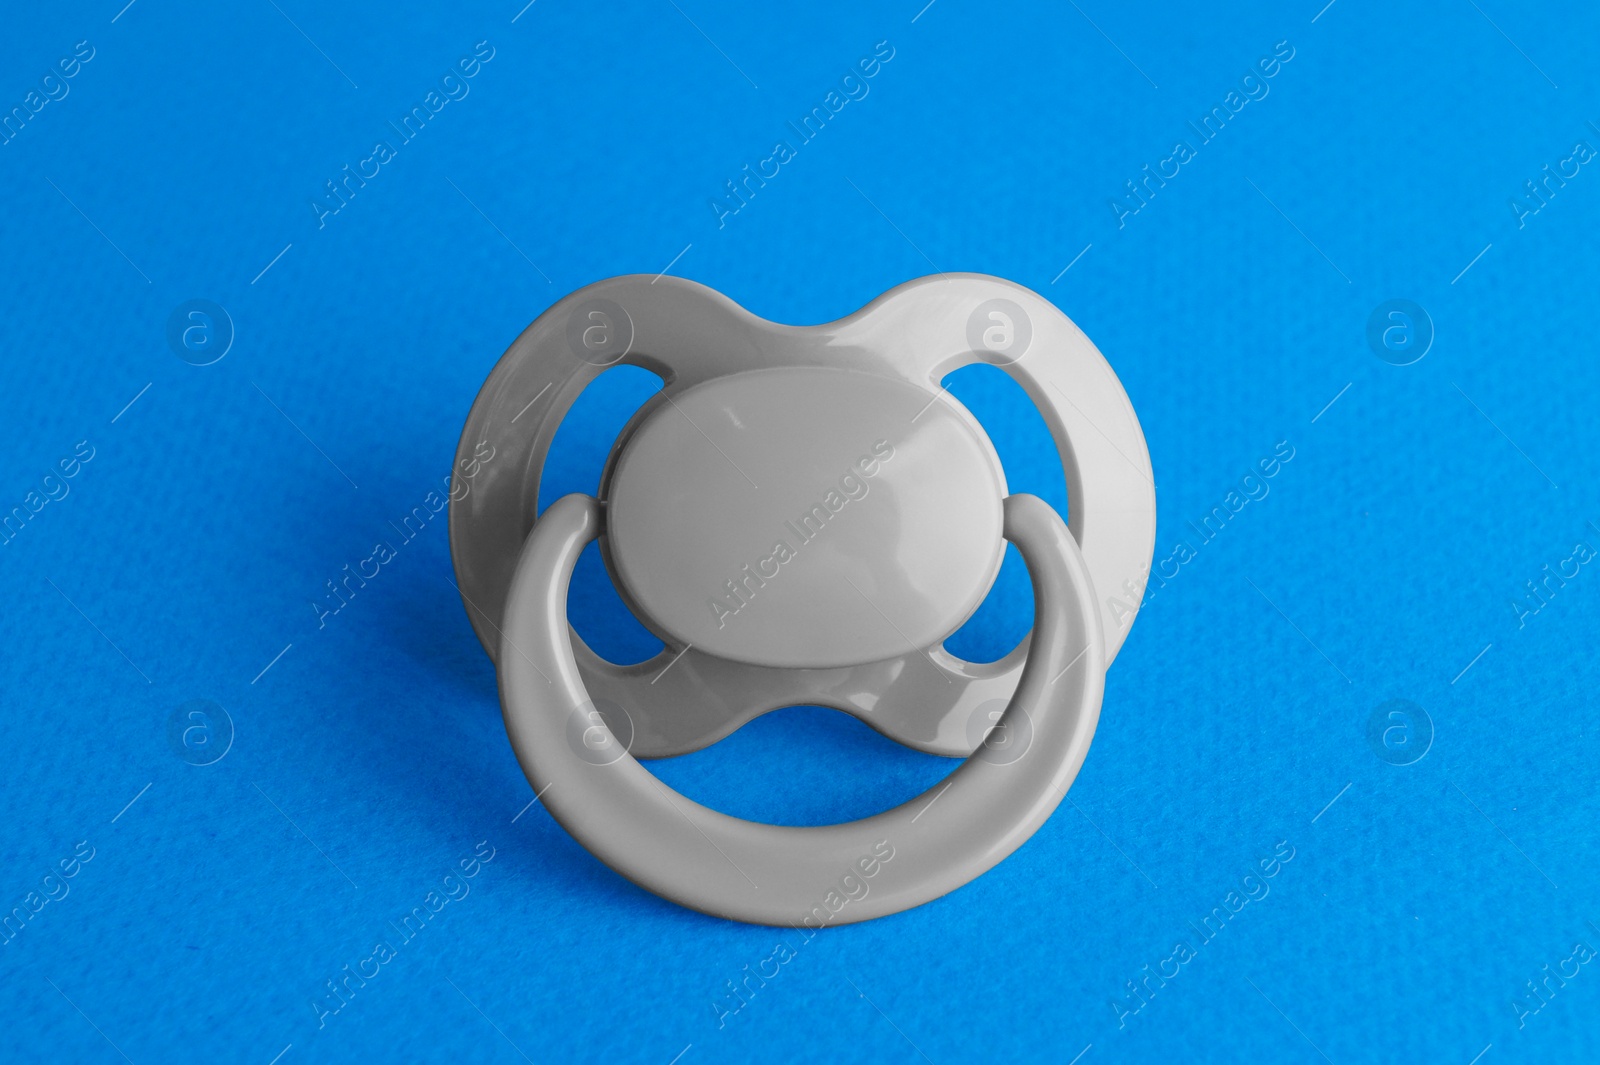 Photo of One new baby pacifier on blue background